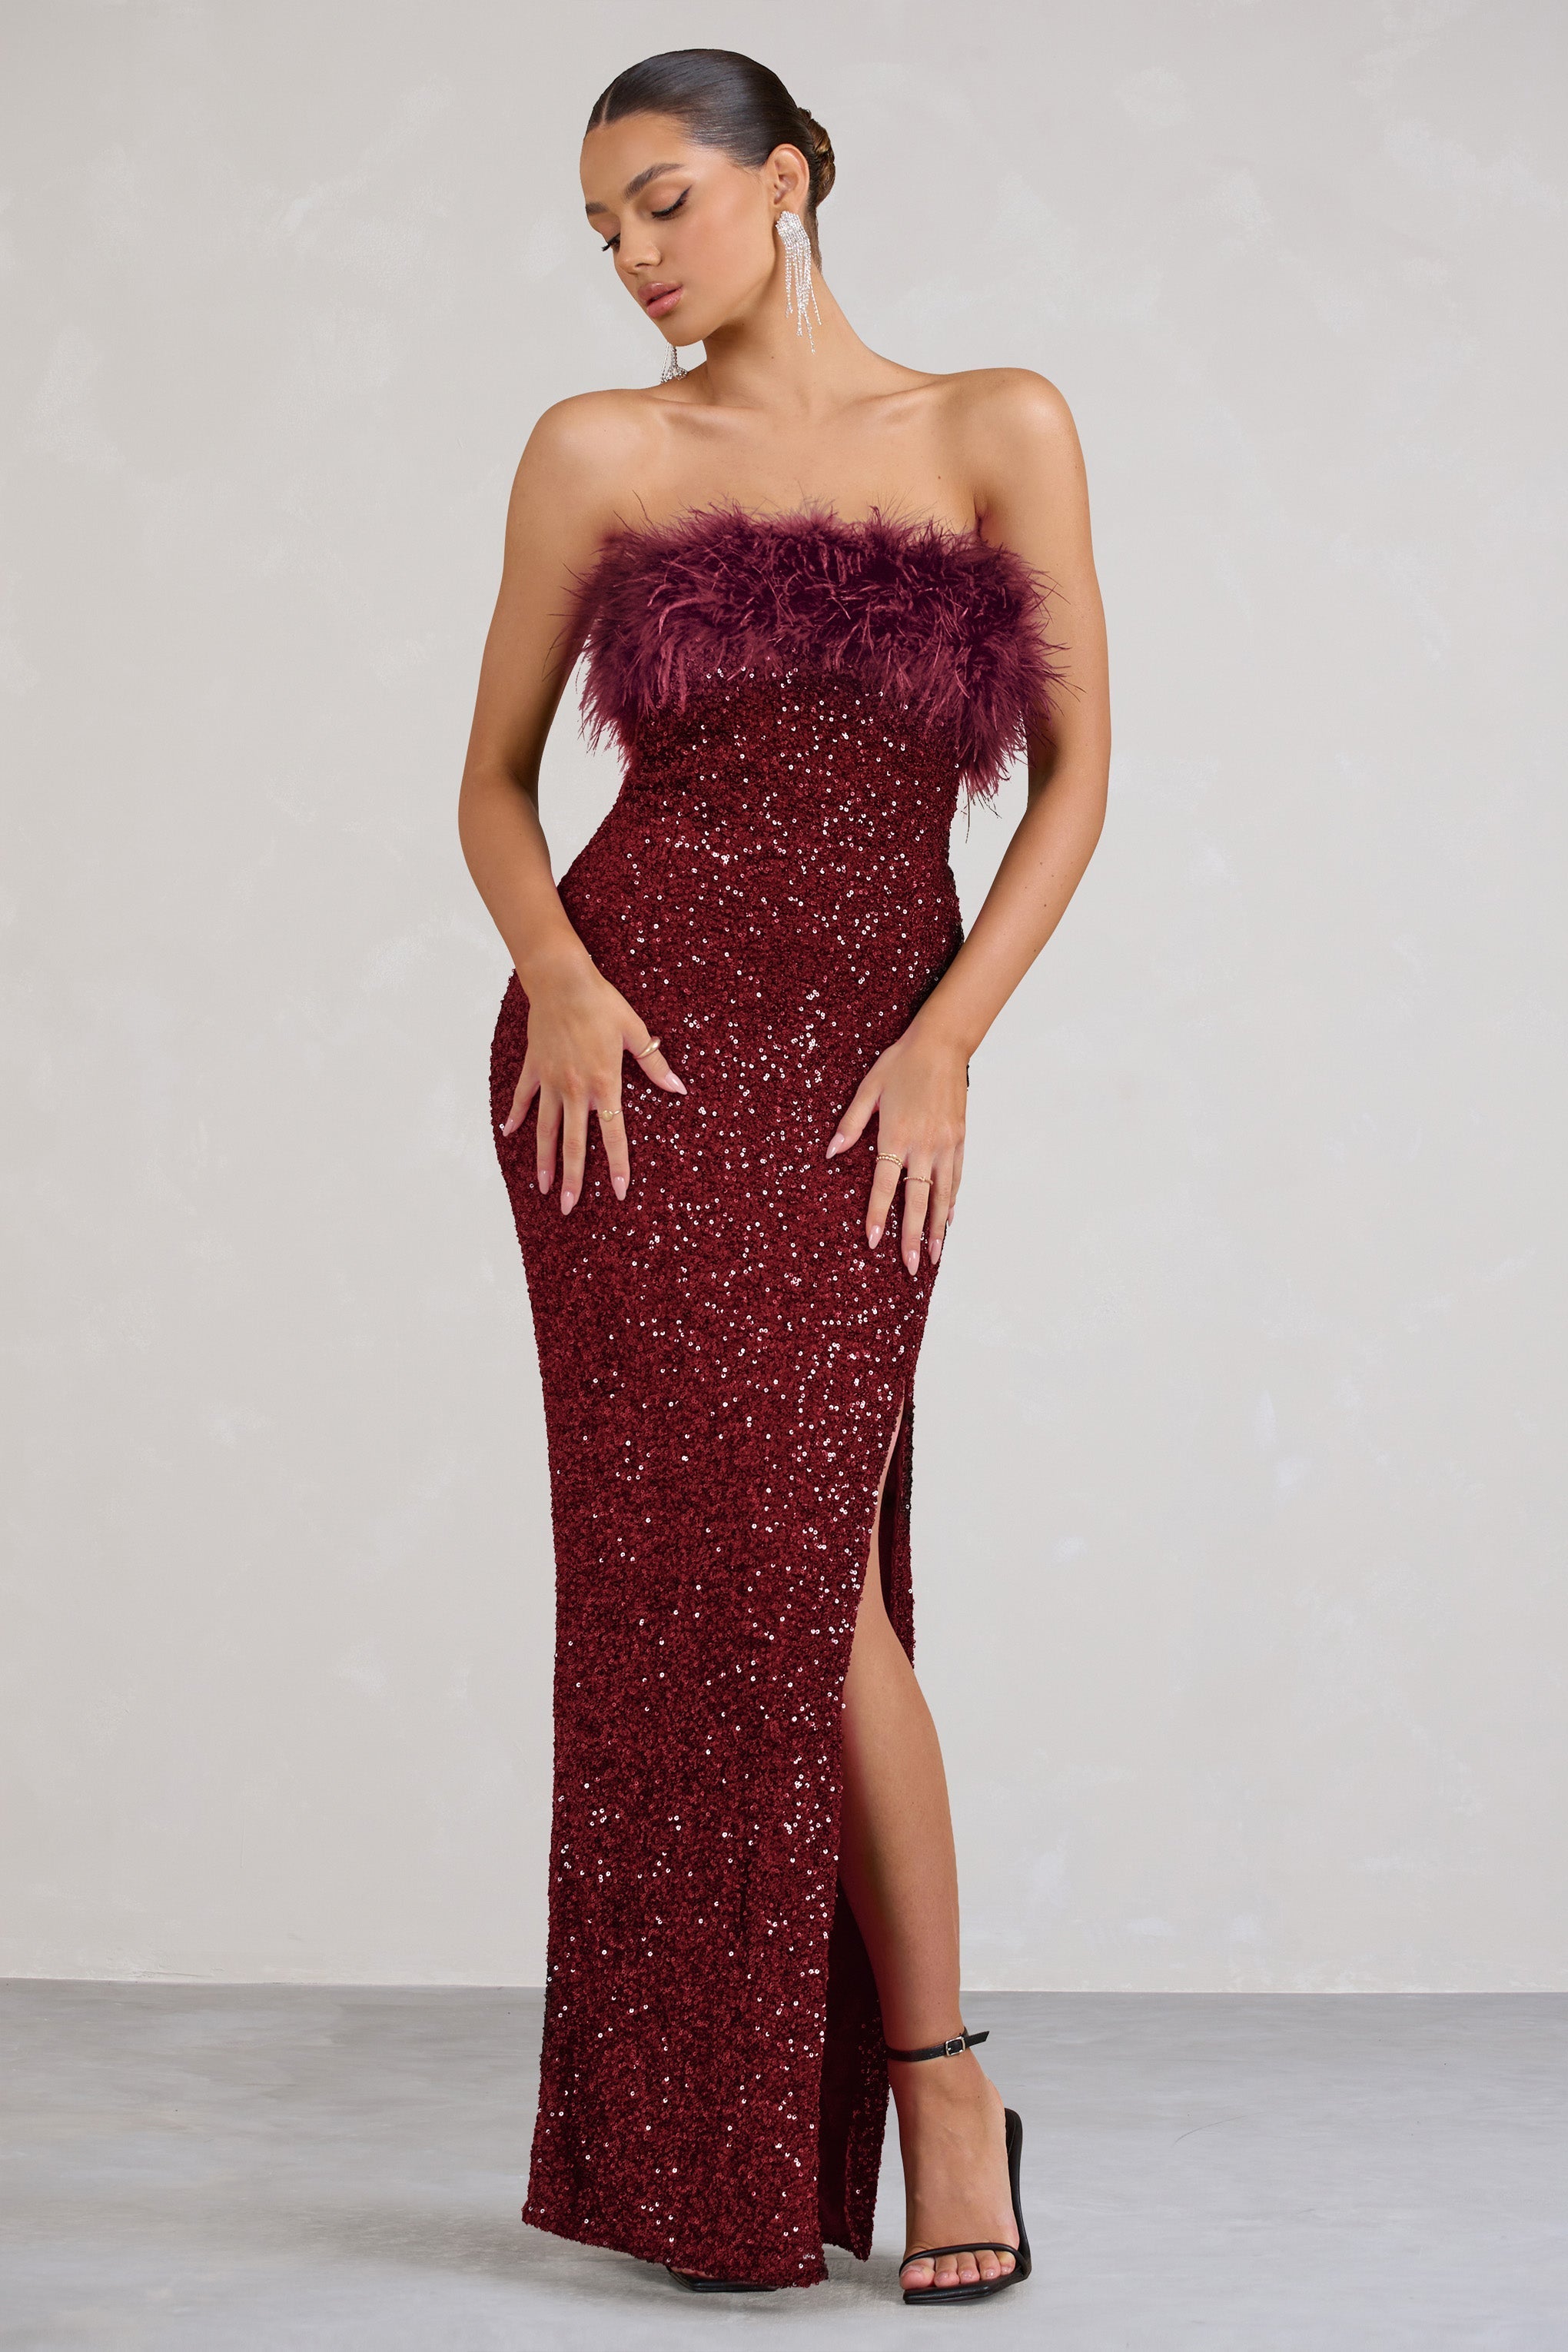 Old Money Burgundy Bodycon Sequin Maxi Dress With Feather Trim